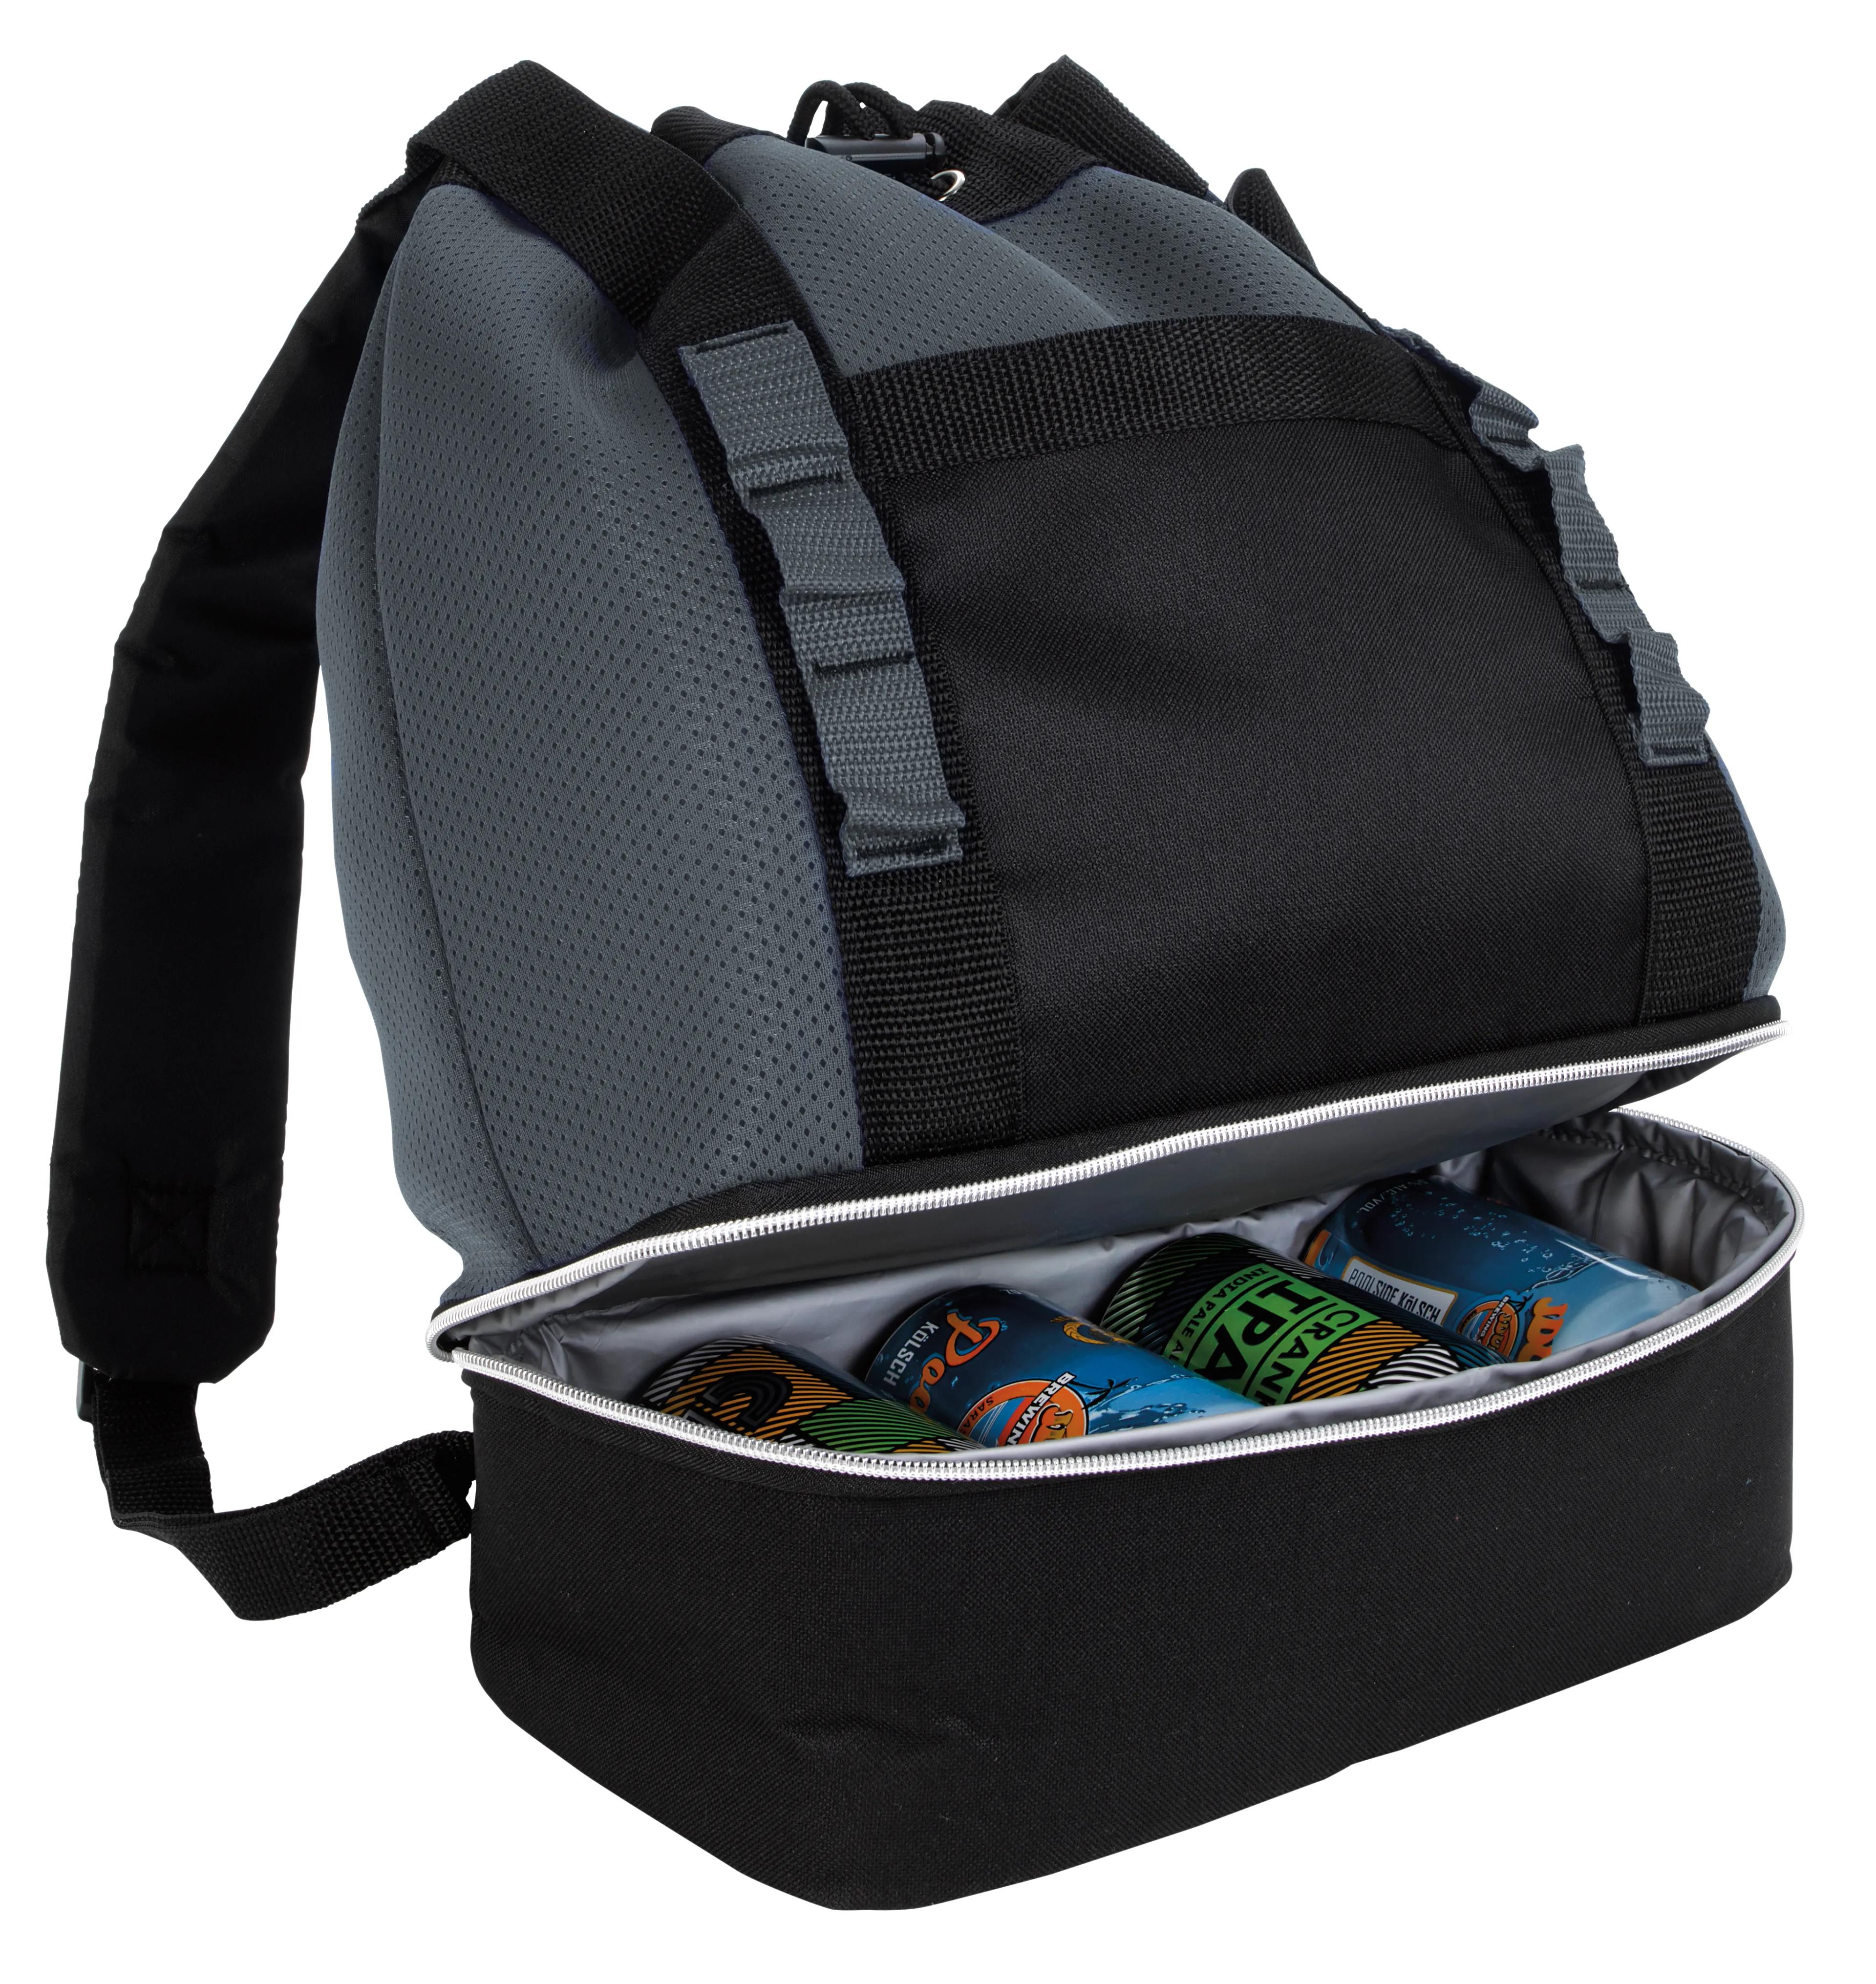 Brightwater Dual-Compartment Tote-Pack Cooler 21 of 43